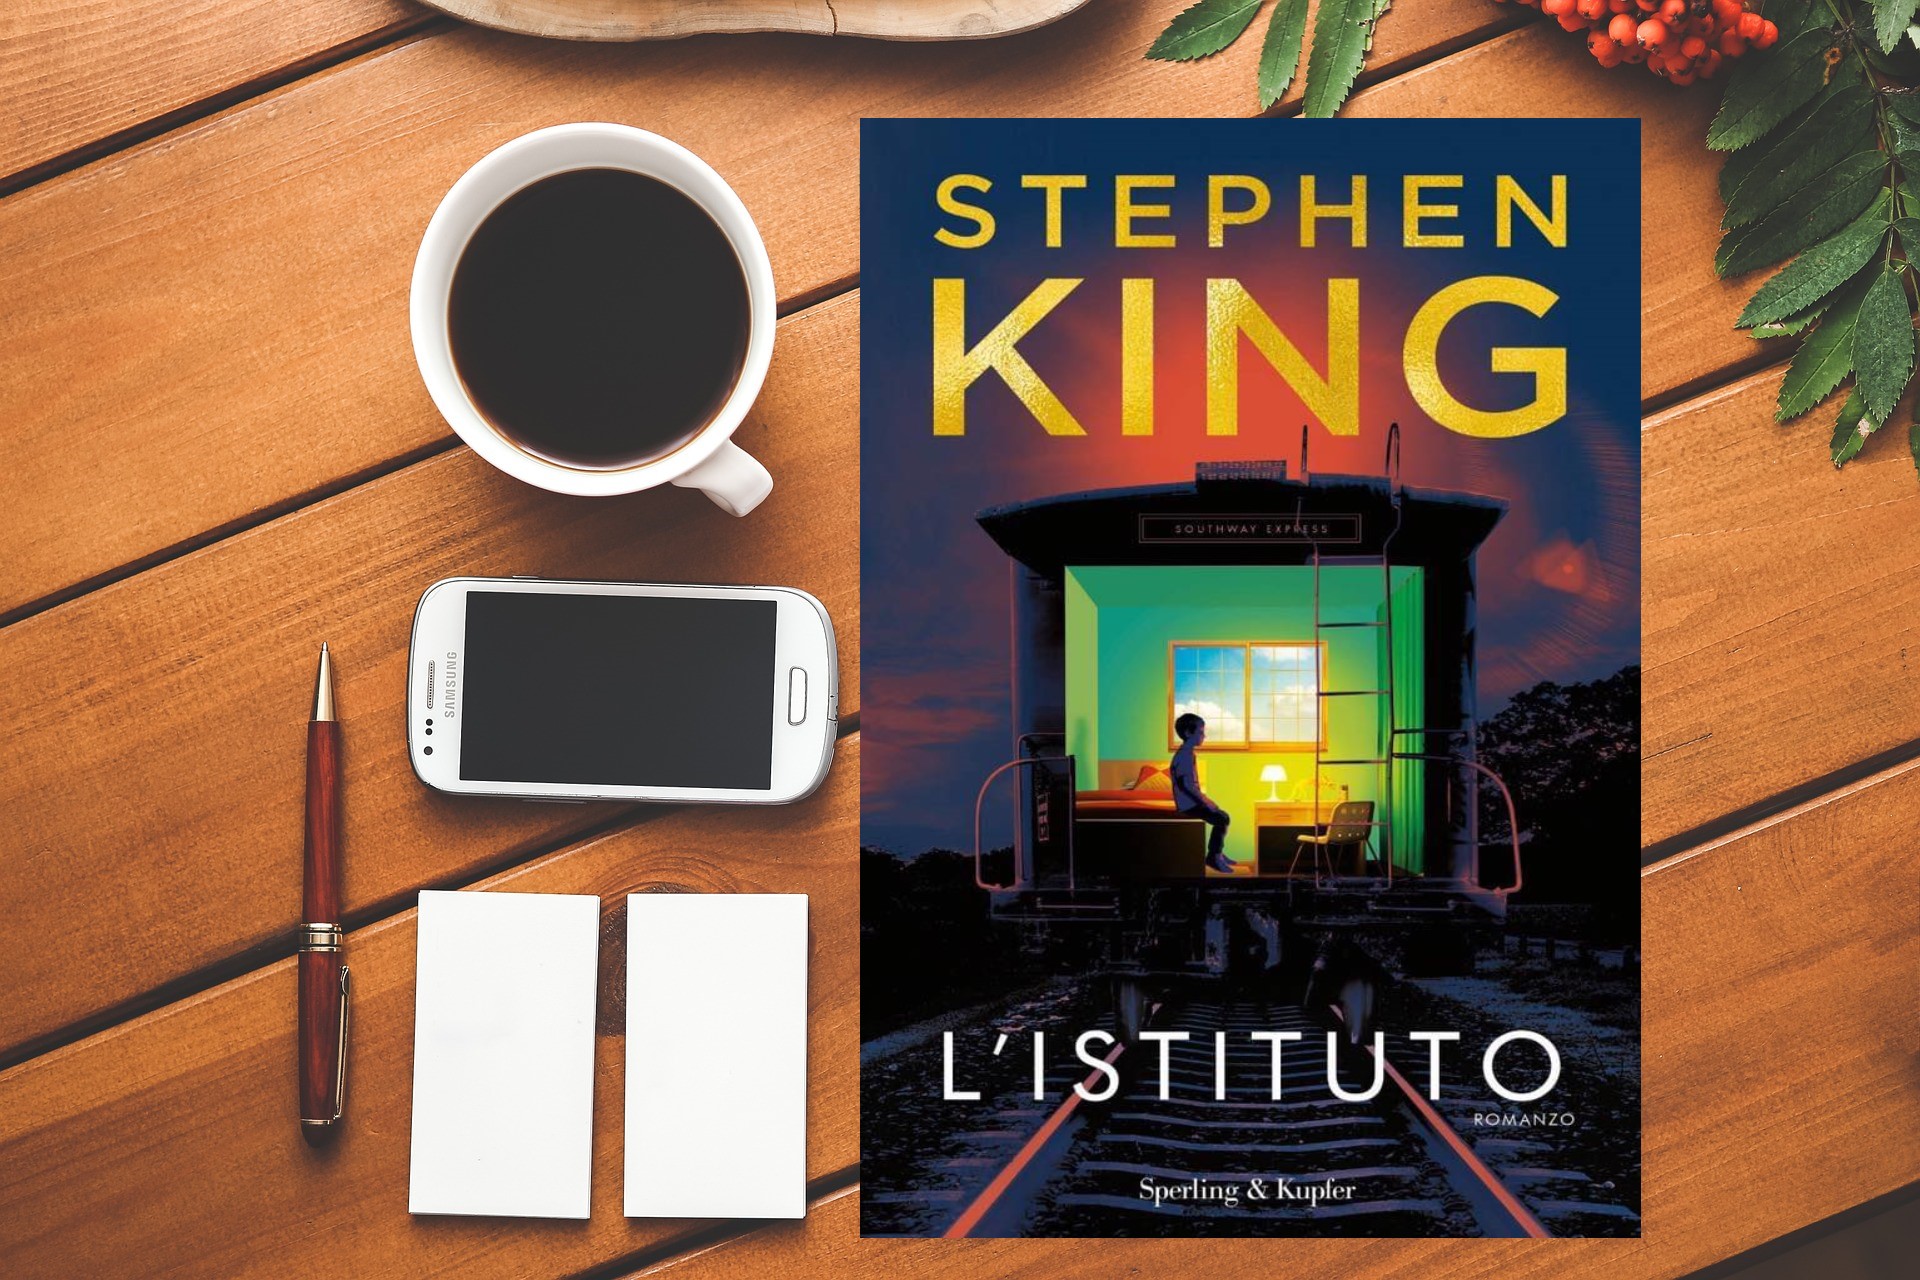 l'istituto stephen king